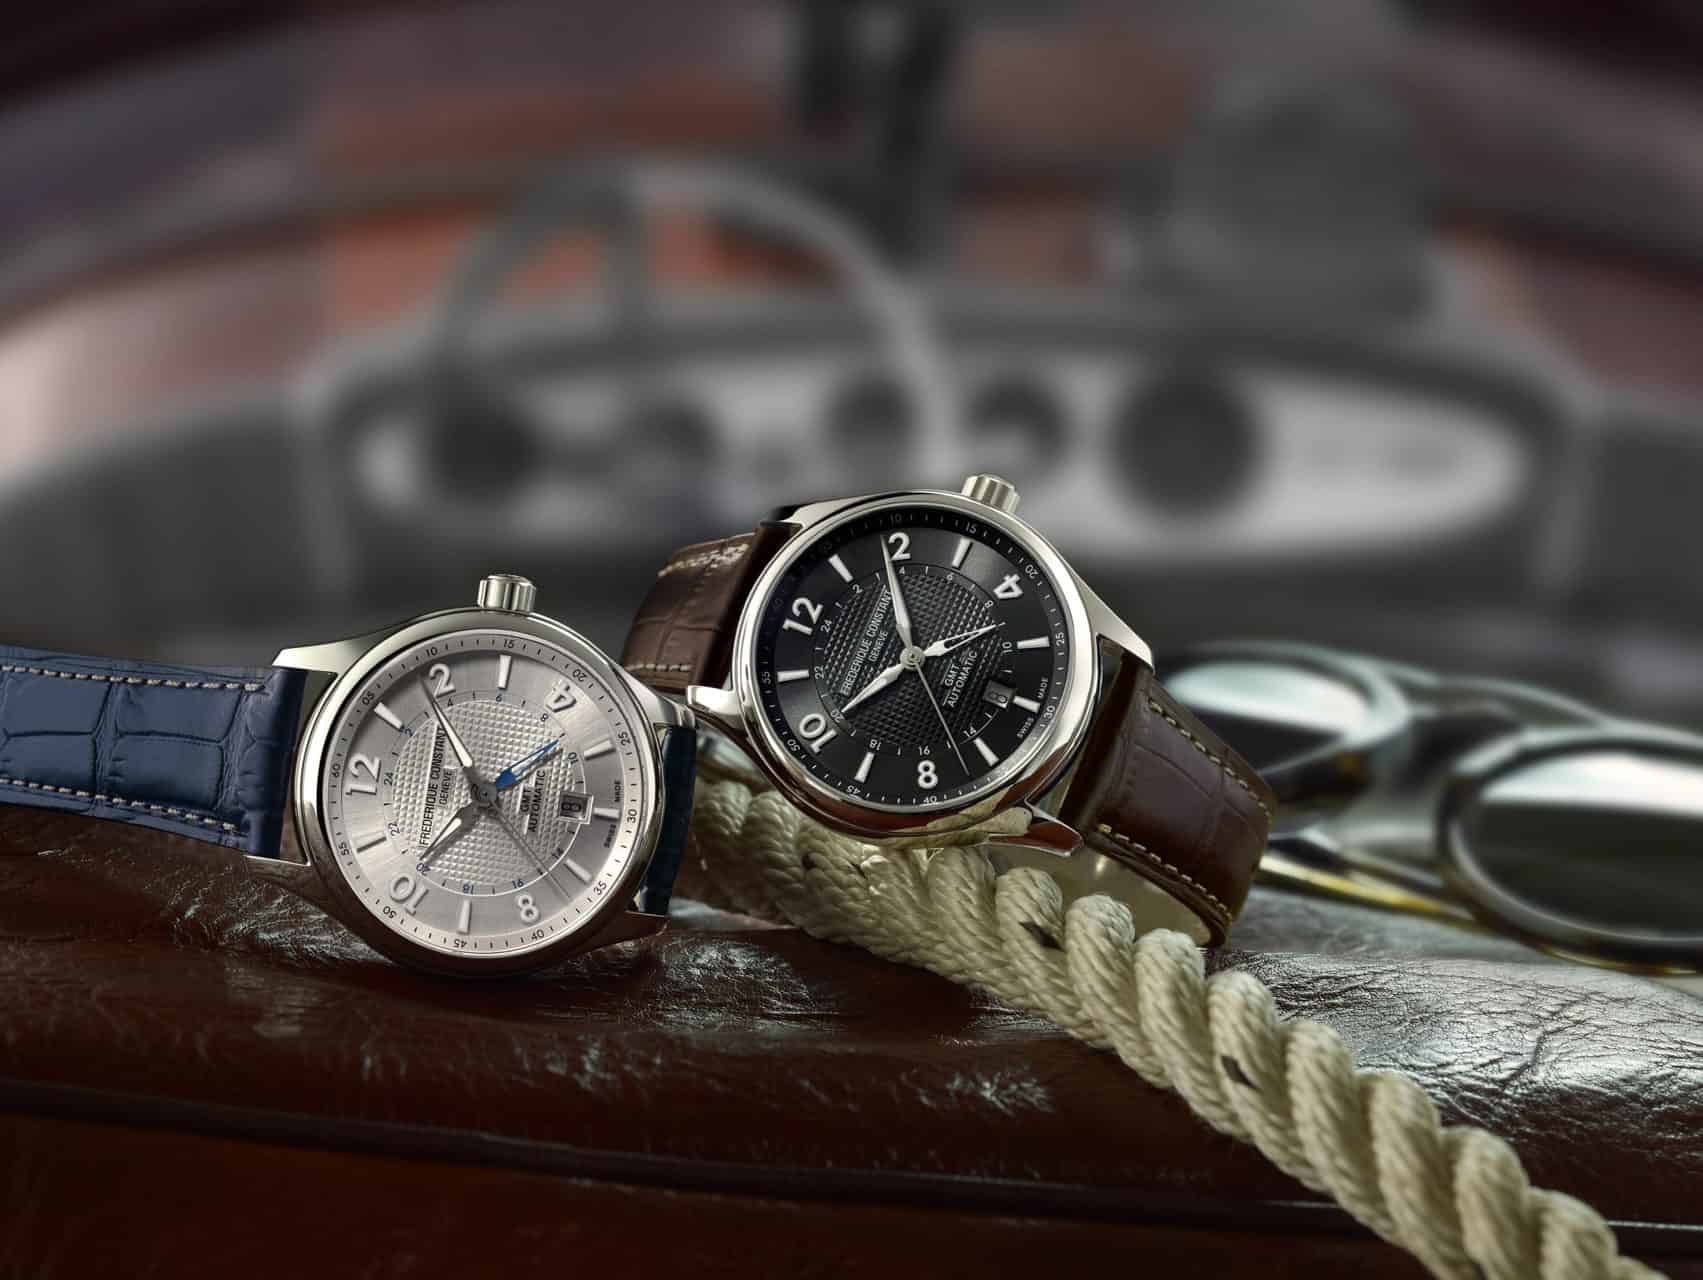 Frederique Constant’s Runabout Tribute to an Elegant Time